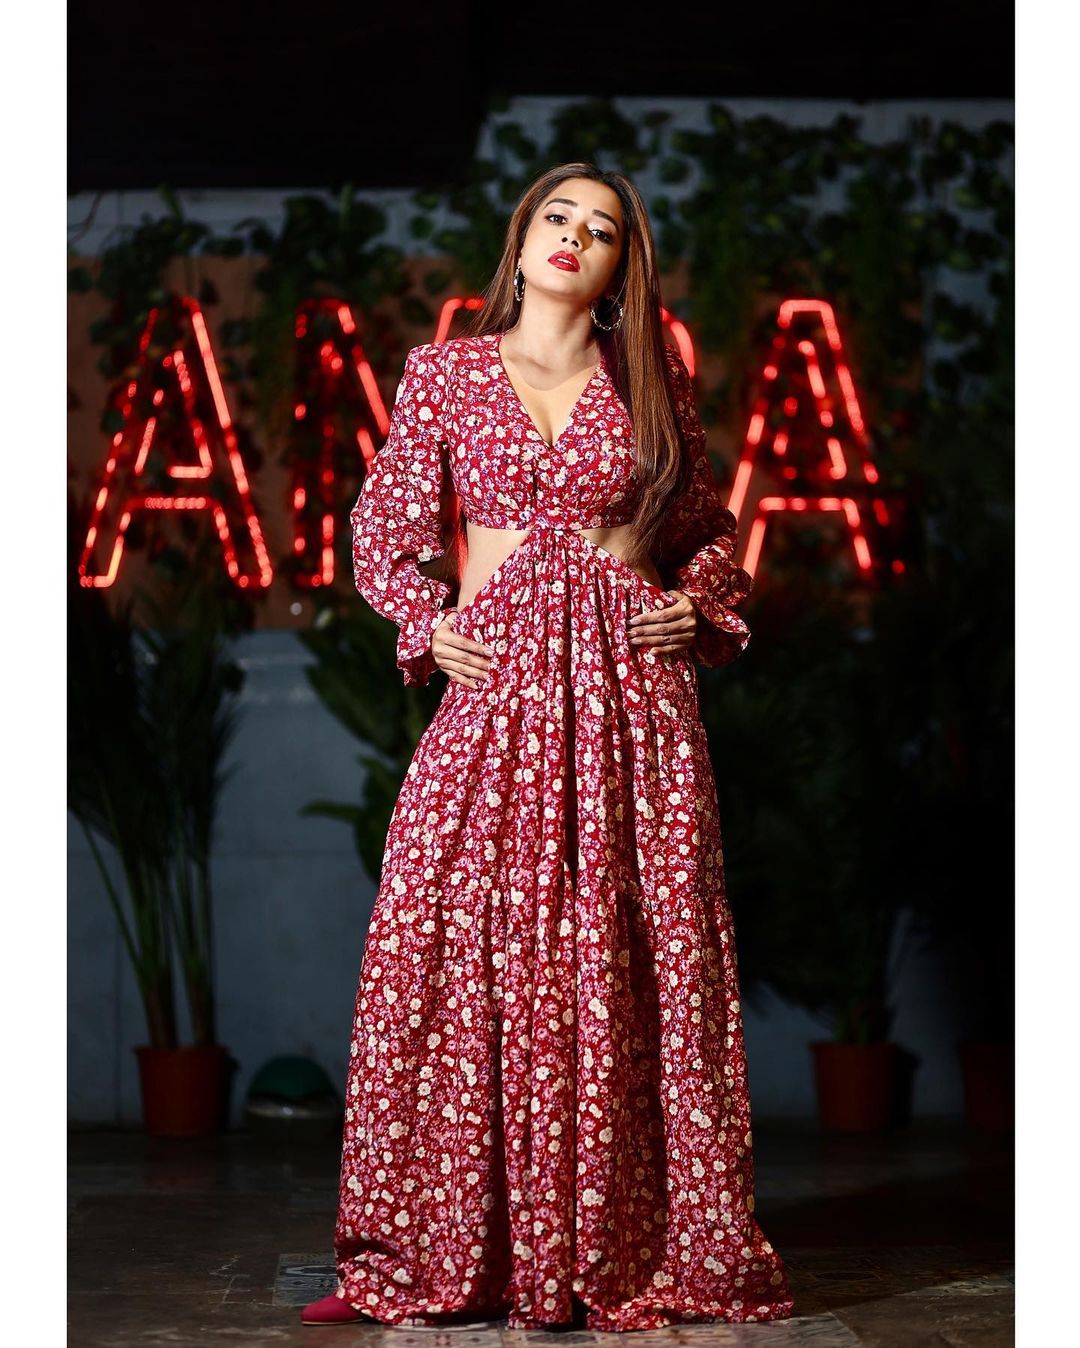 Tina Datta Sizzles in Red Hot Gown: 'Believe in Yourself' With Inspiring Caption 760596